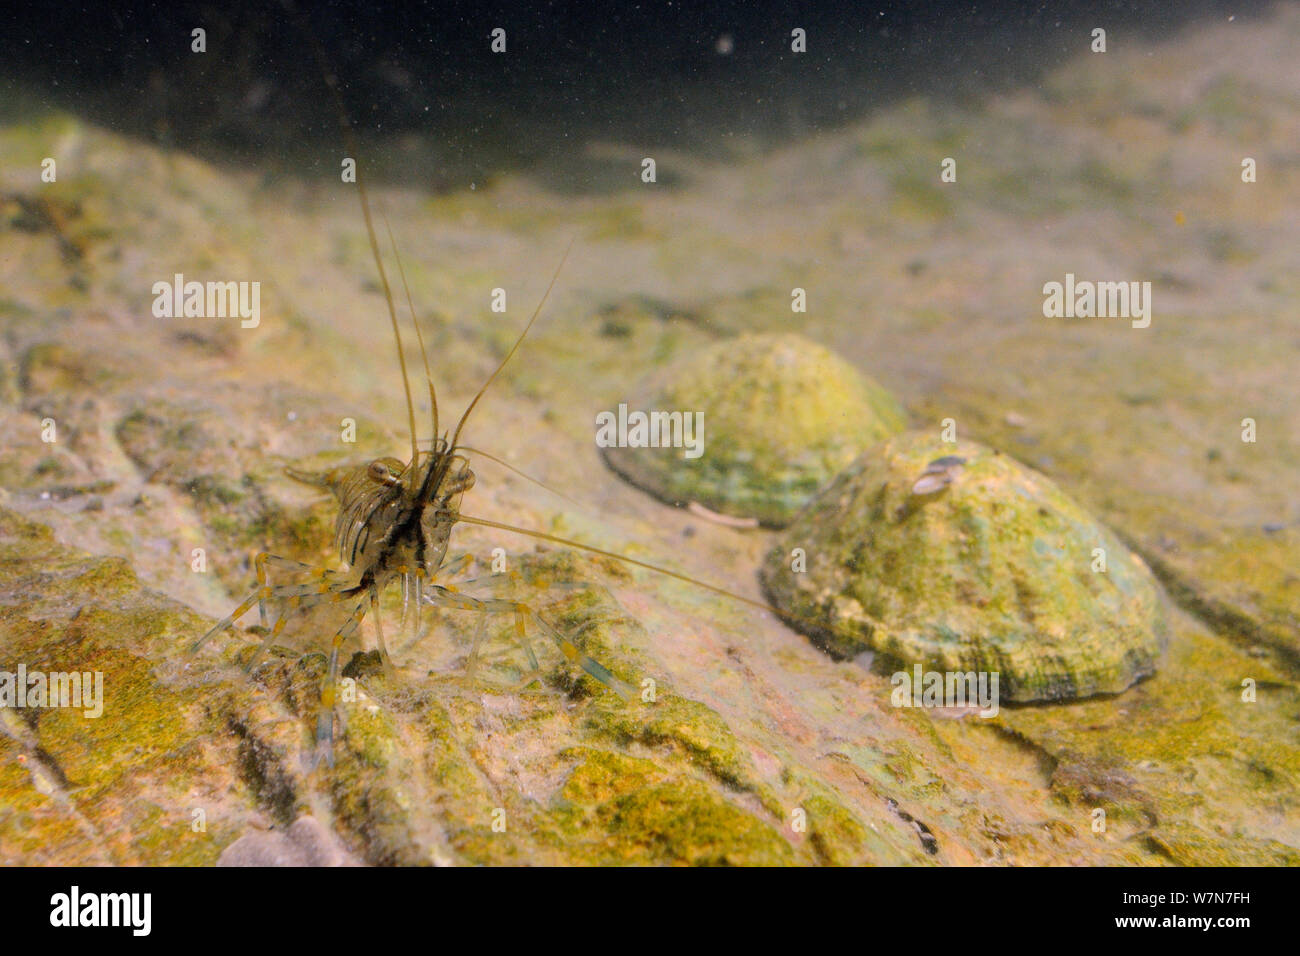 Common prawn (Palaemon serratus) foraging on an algal covered boulder in a rockpool near two Common limpets (Patella vulgata). Rhossili, The Gower Peninsula, UK, July. Stock Photo